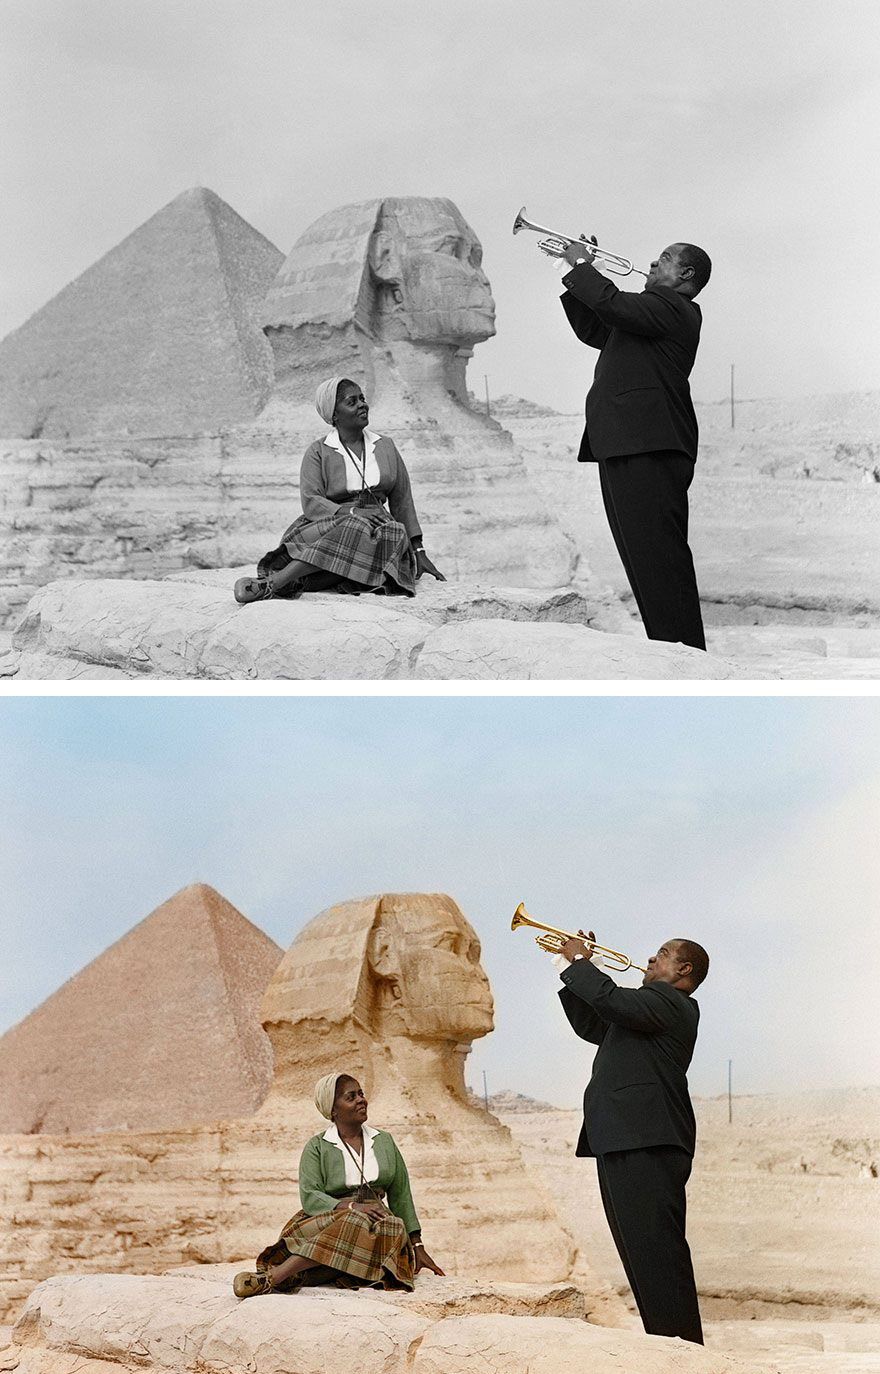 Louis and Lucille Armstrong at the Sphinx, January 28, 1961